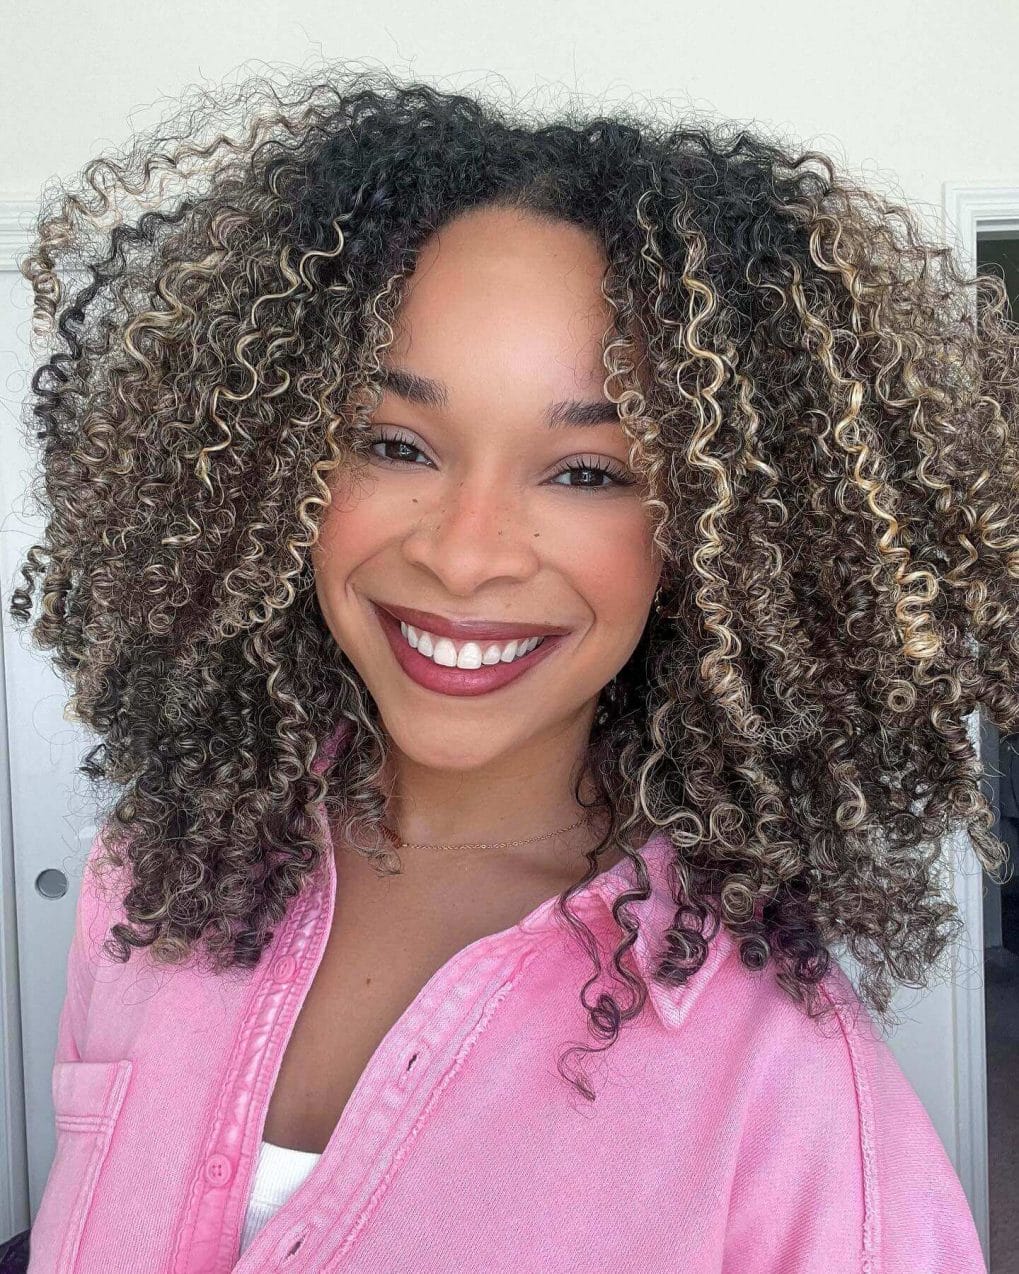 Joyful, bouncy curls with lively highlights